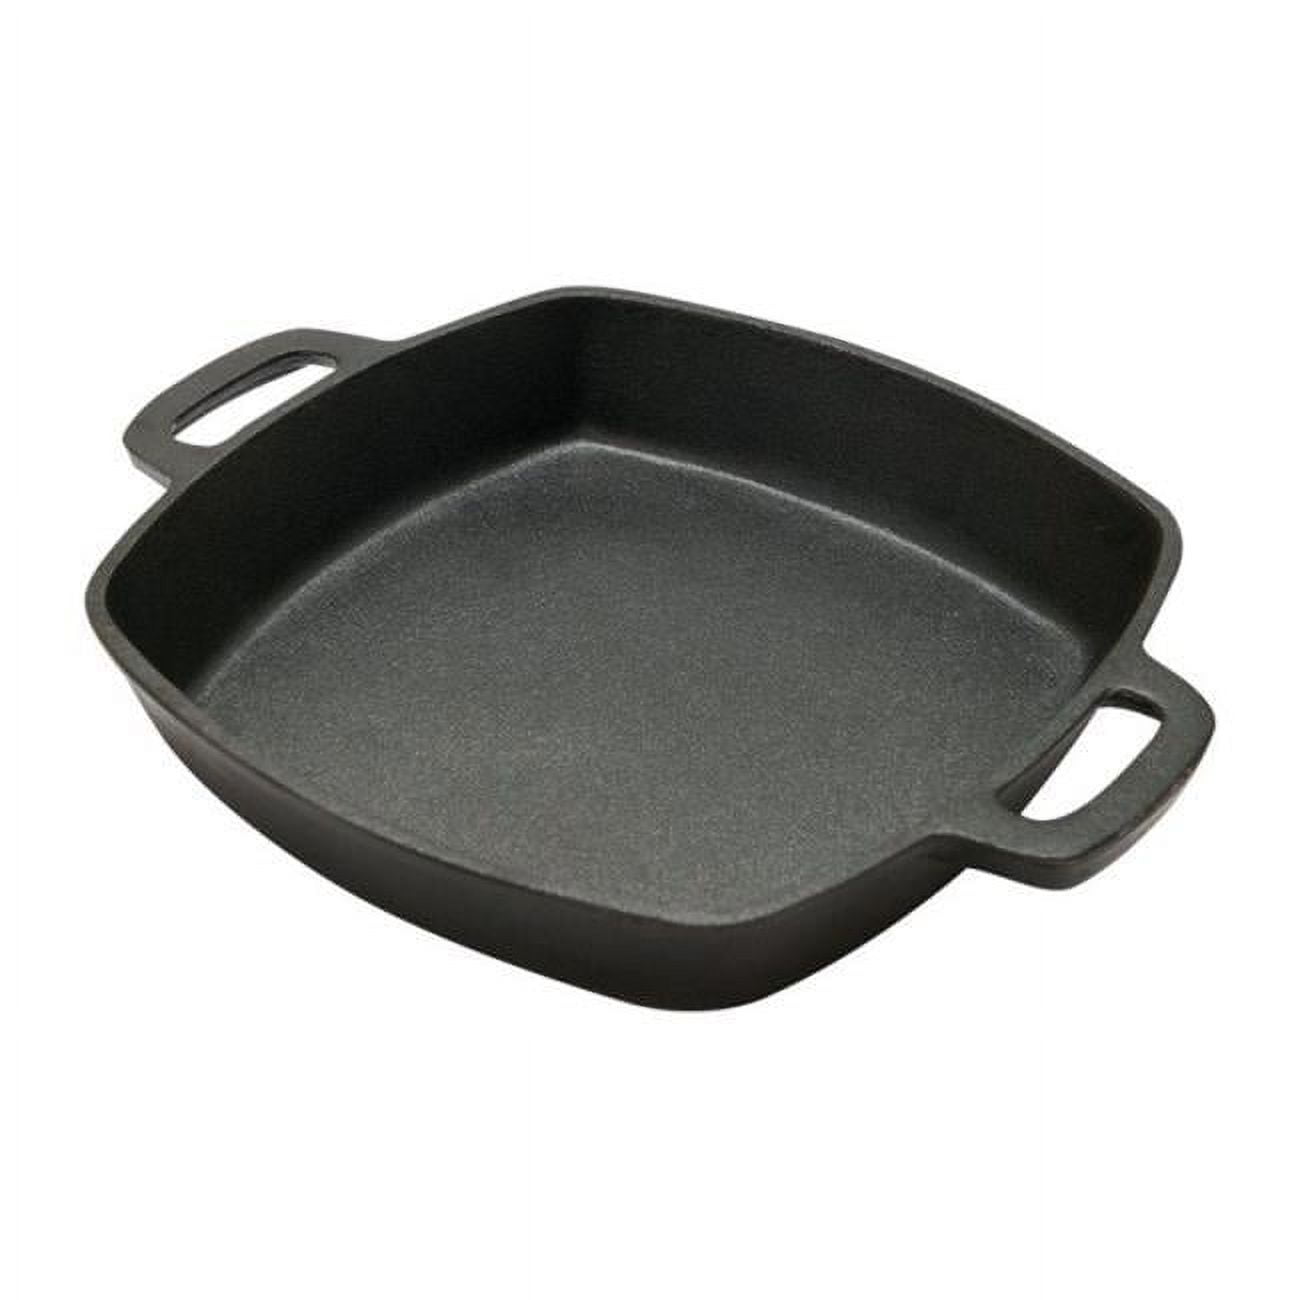 NuWave Cast Iron Non-Stick Induction Ready Skillet Griddle Grill Pan 16x10  Black